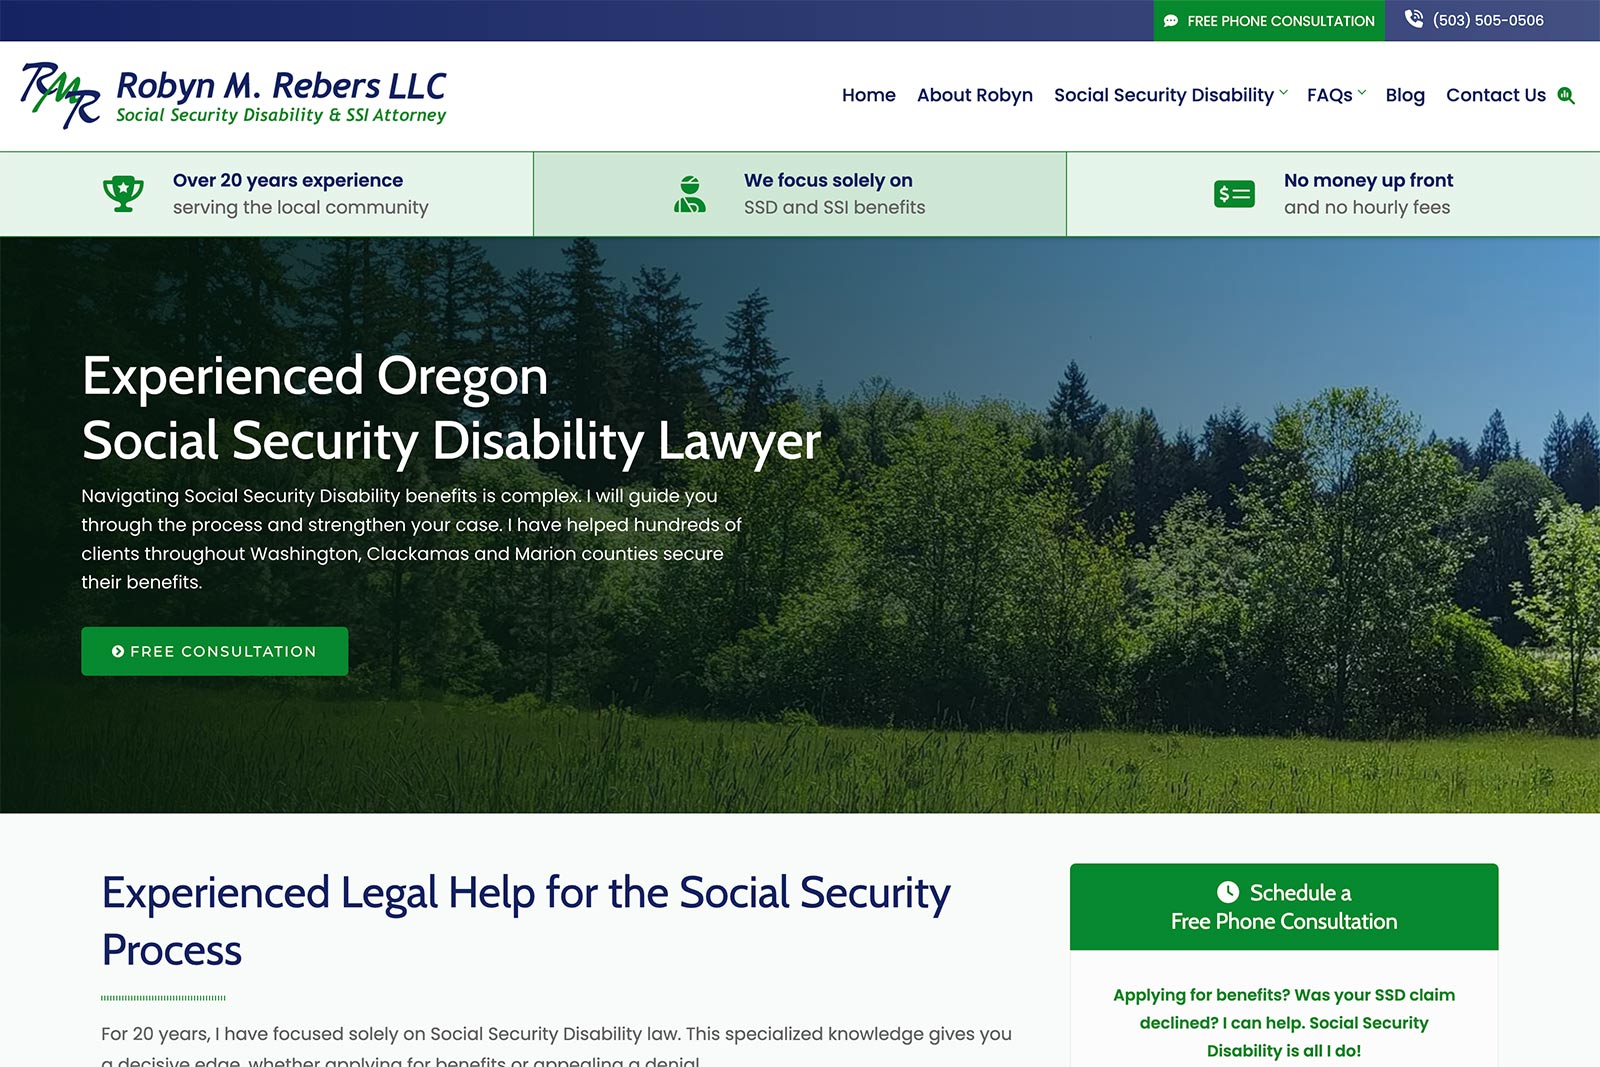 Screenshot of Robyn M. Rebers LLC Website - Example of a Law Firm Web Design - Home Page